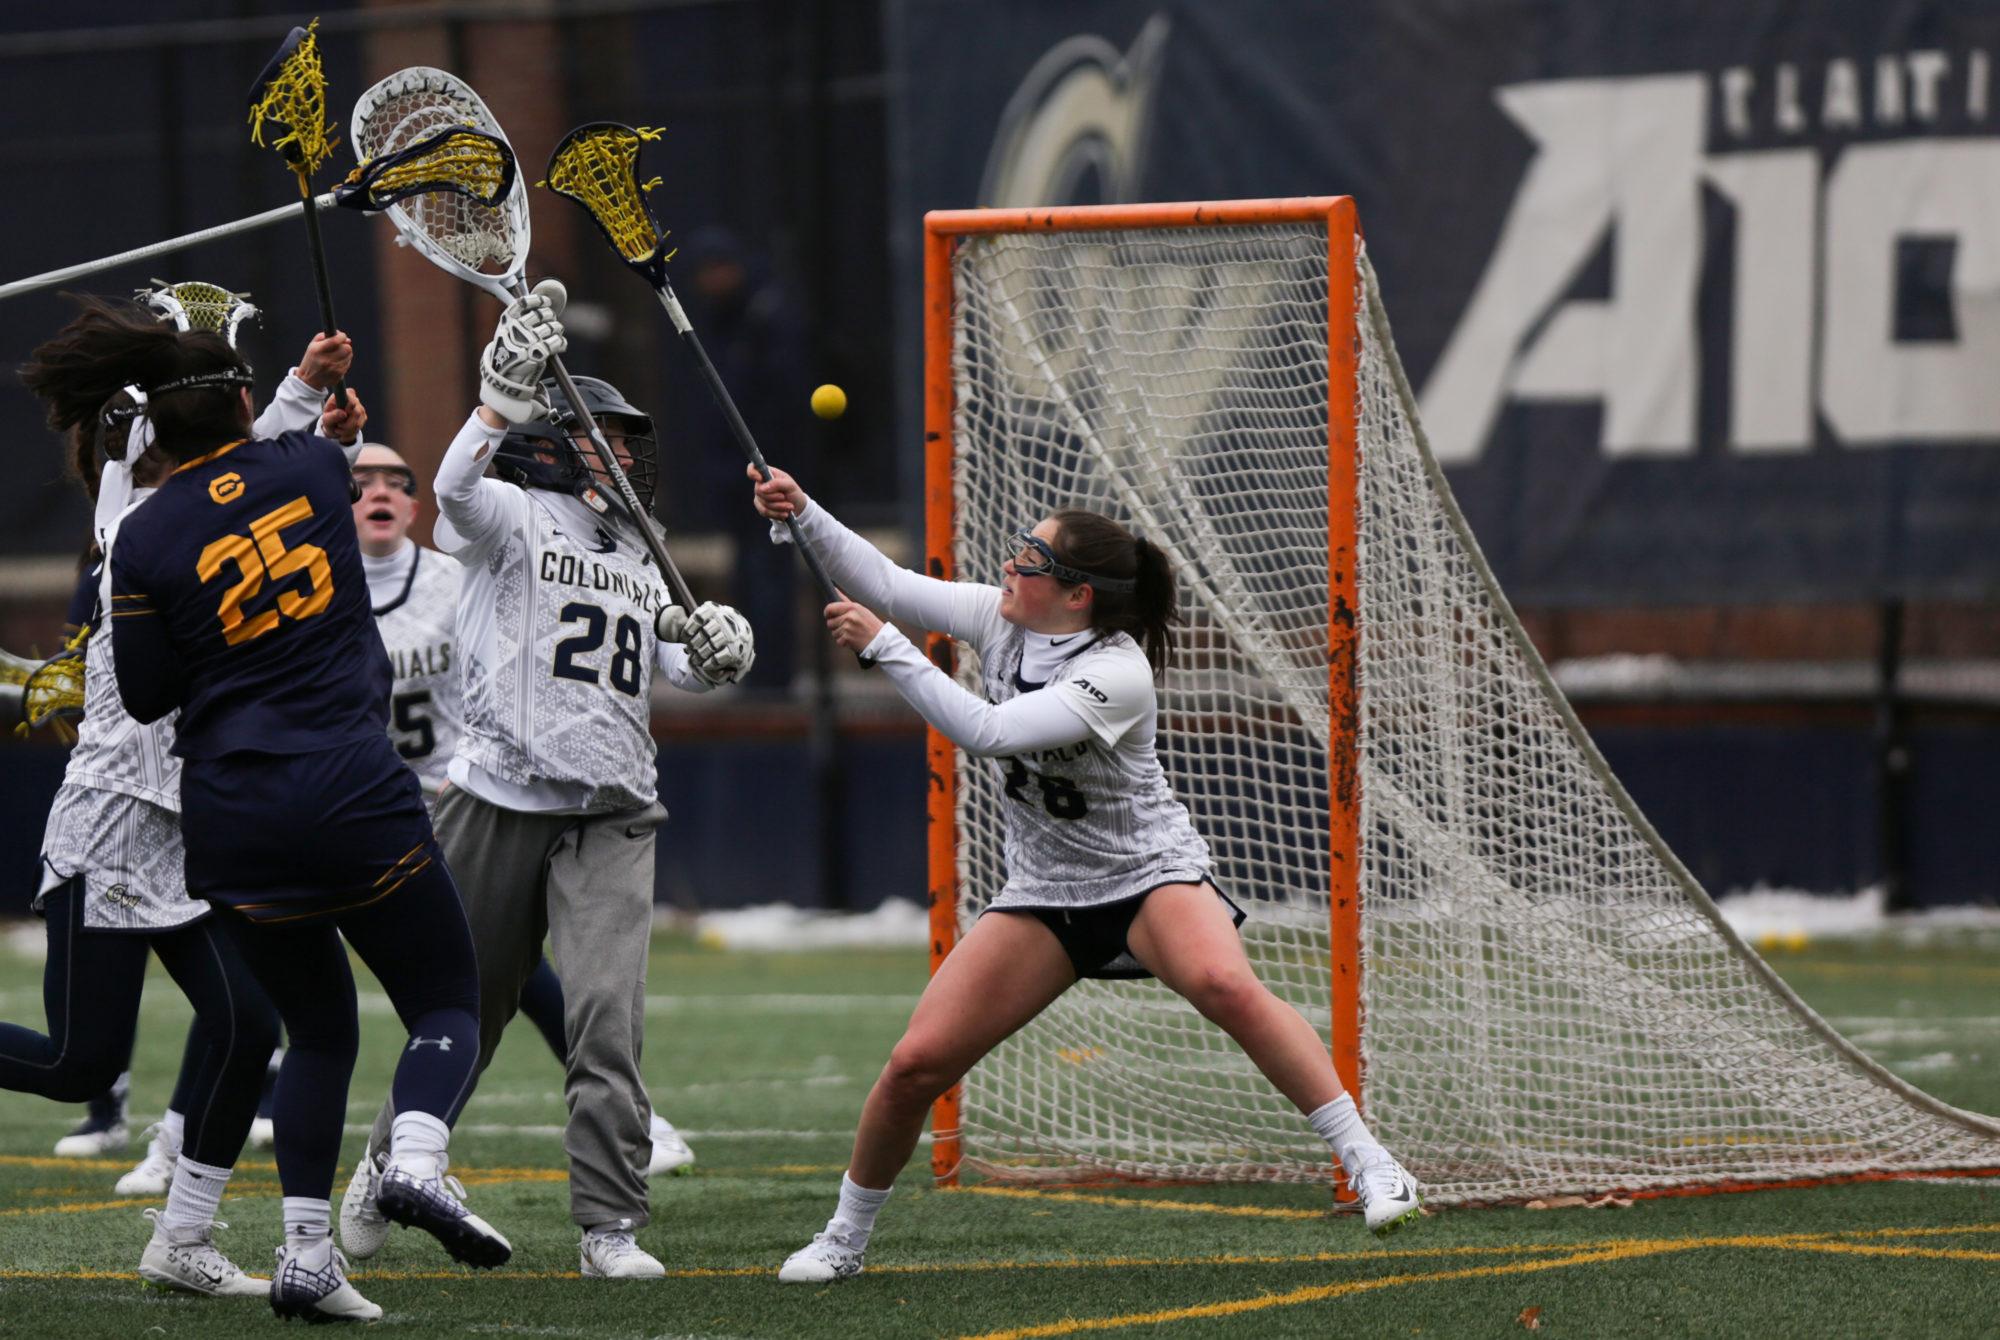 California jumps out to early lead, drops lacrosse at home The GW Hatchet